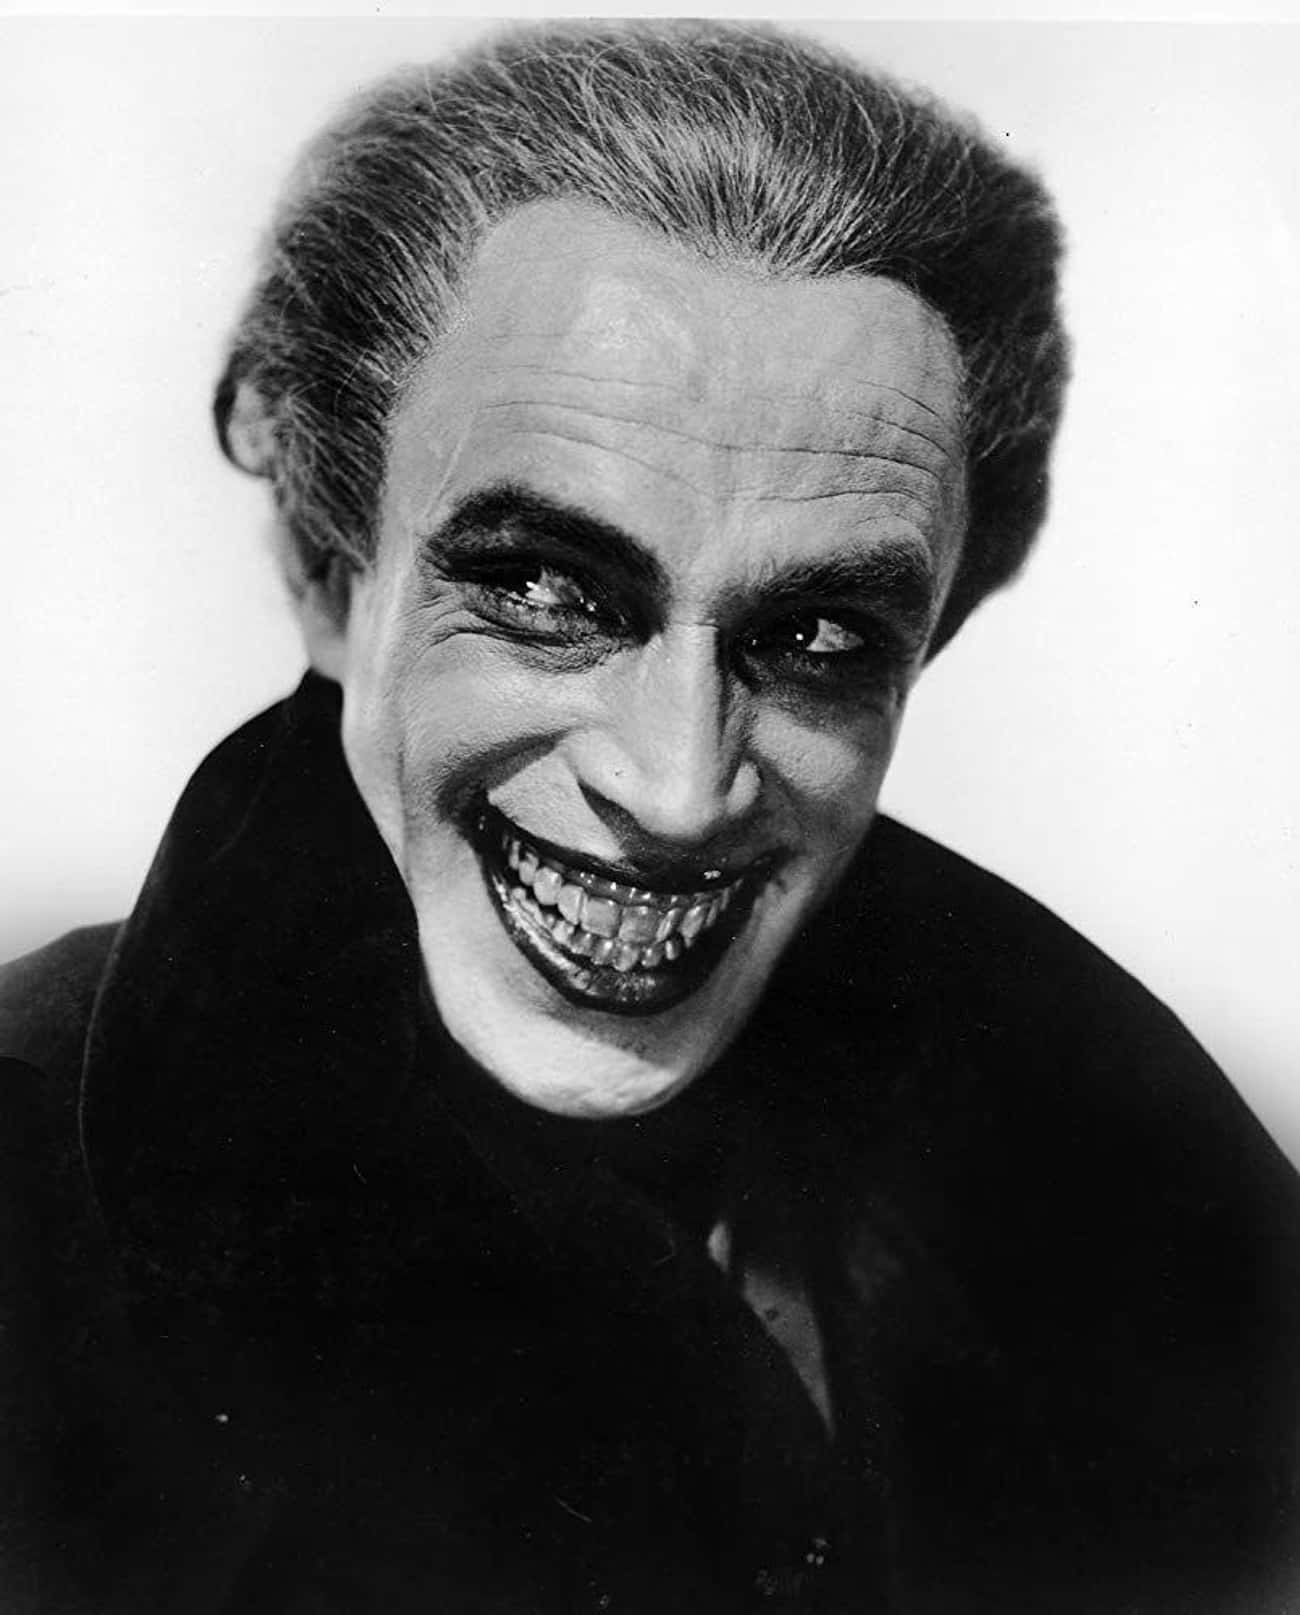 The Original Joker Was Directly Inspired By Conrad Veidt In ‘The Man Who Laughs’ 